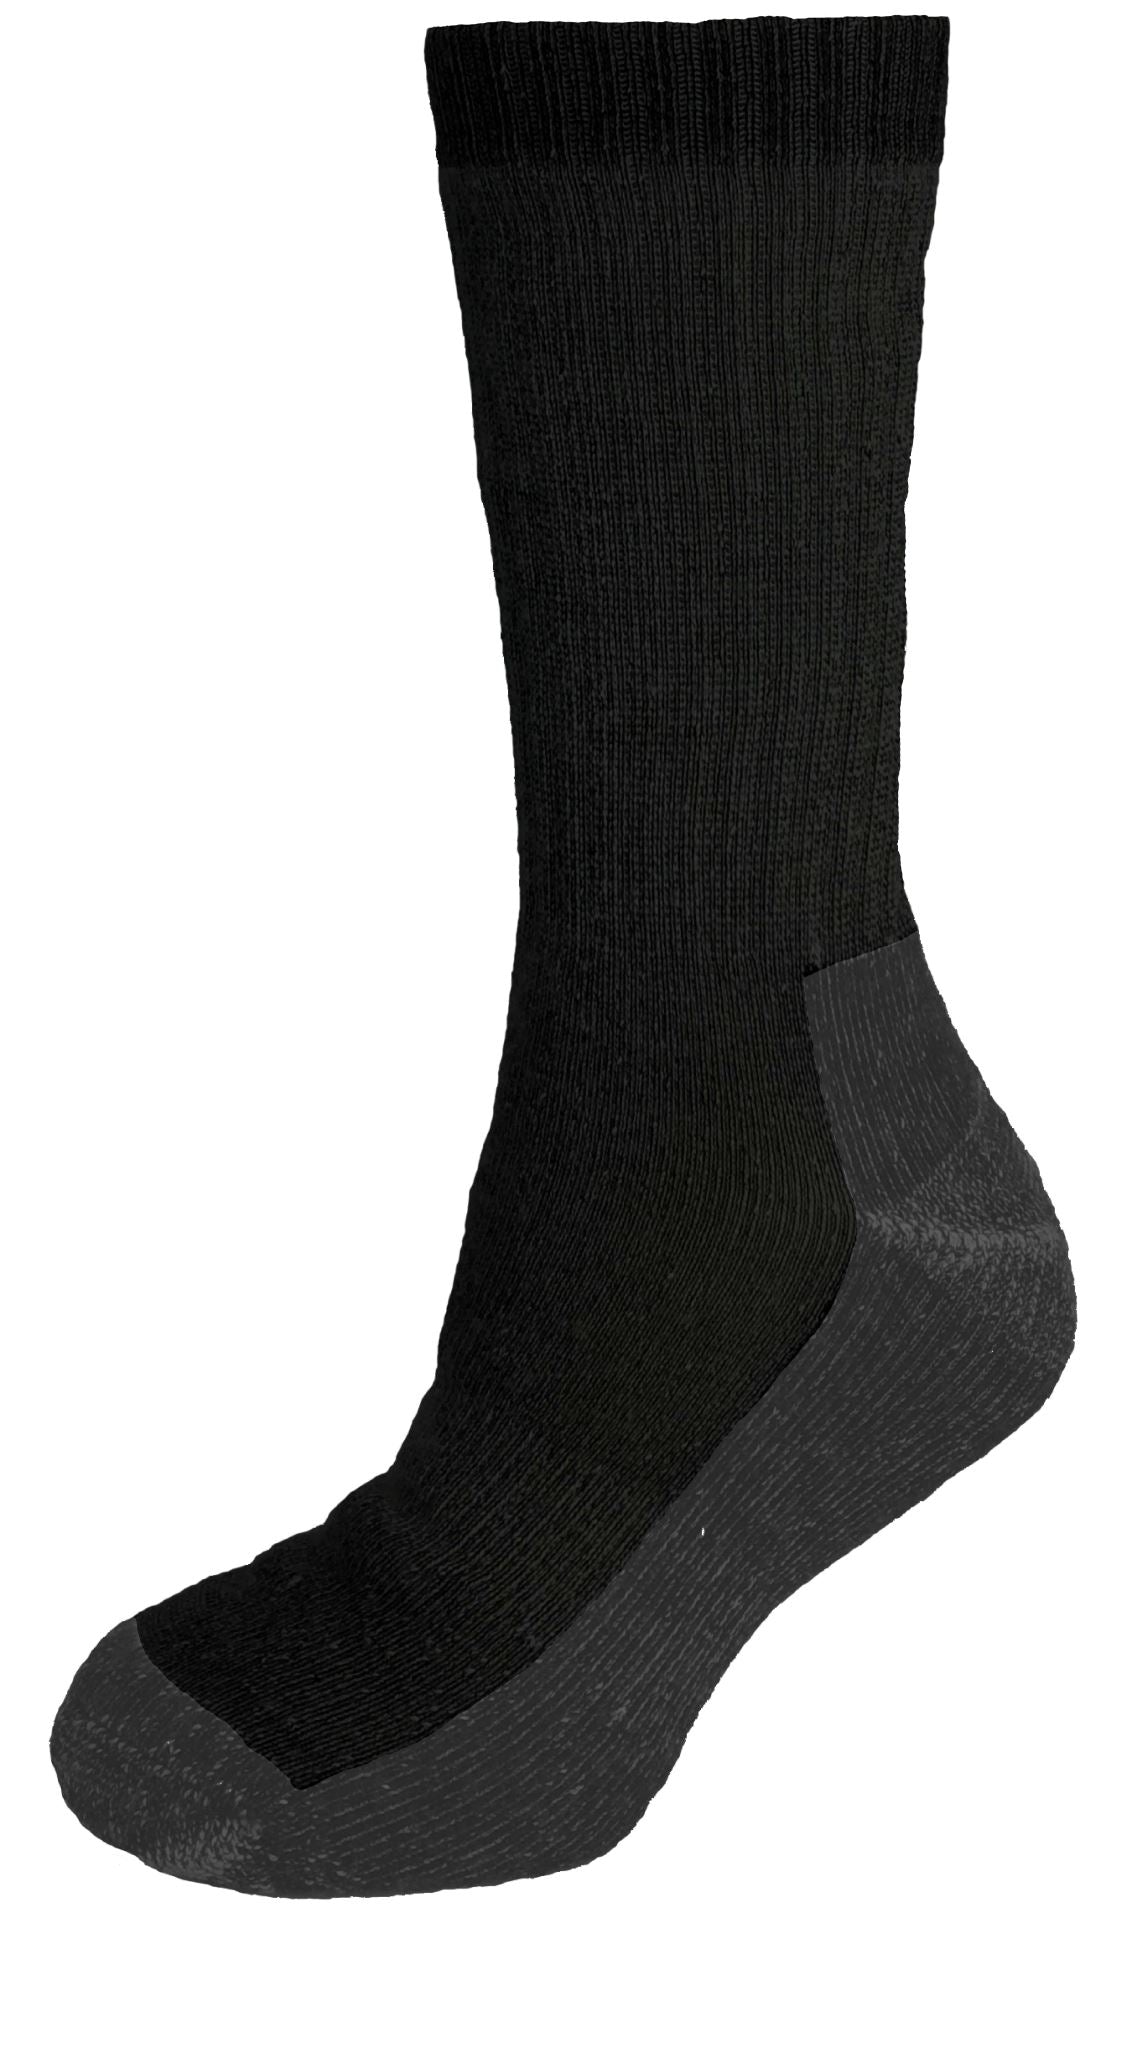 Thermatech 3 Pack Outdoor Crew Socks Black/Grey, Size US 11-13 T38U